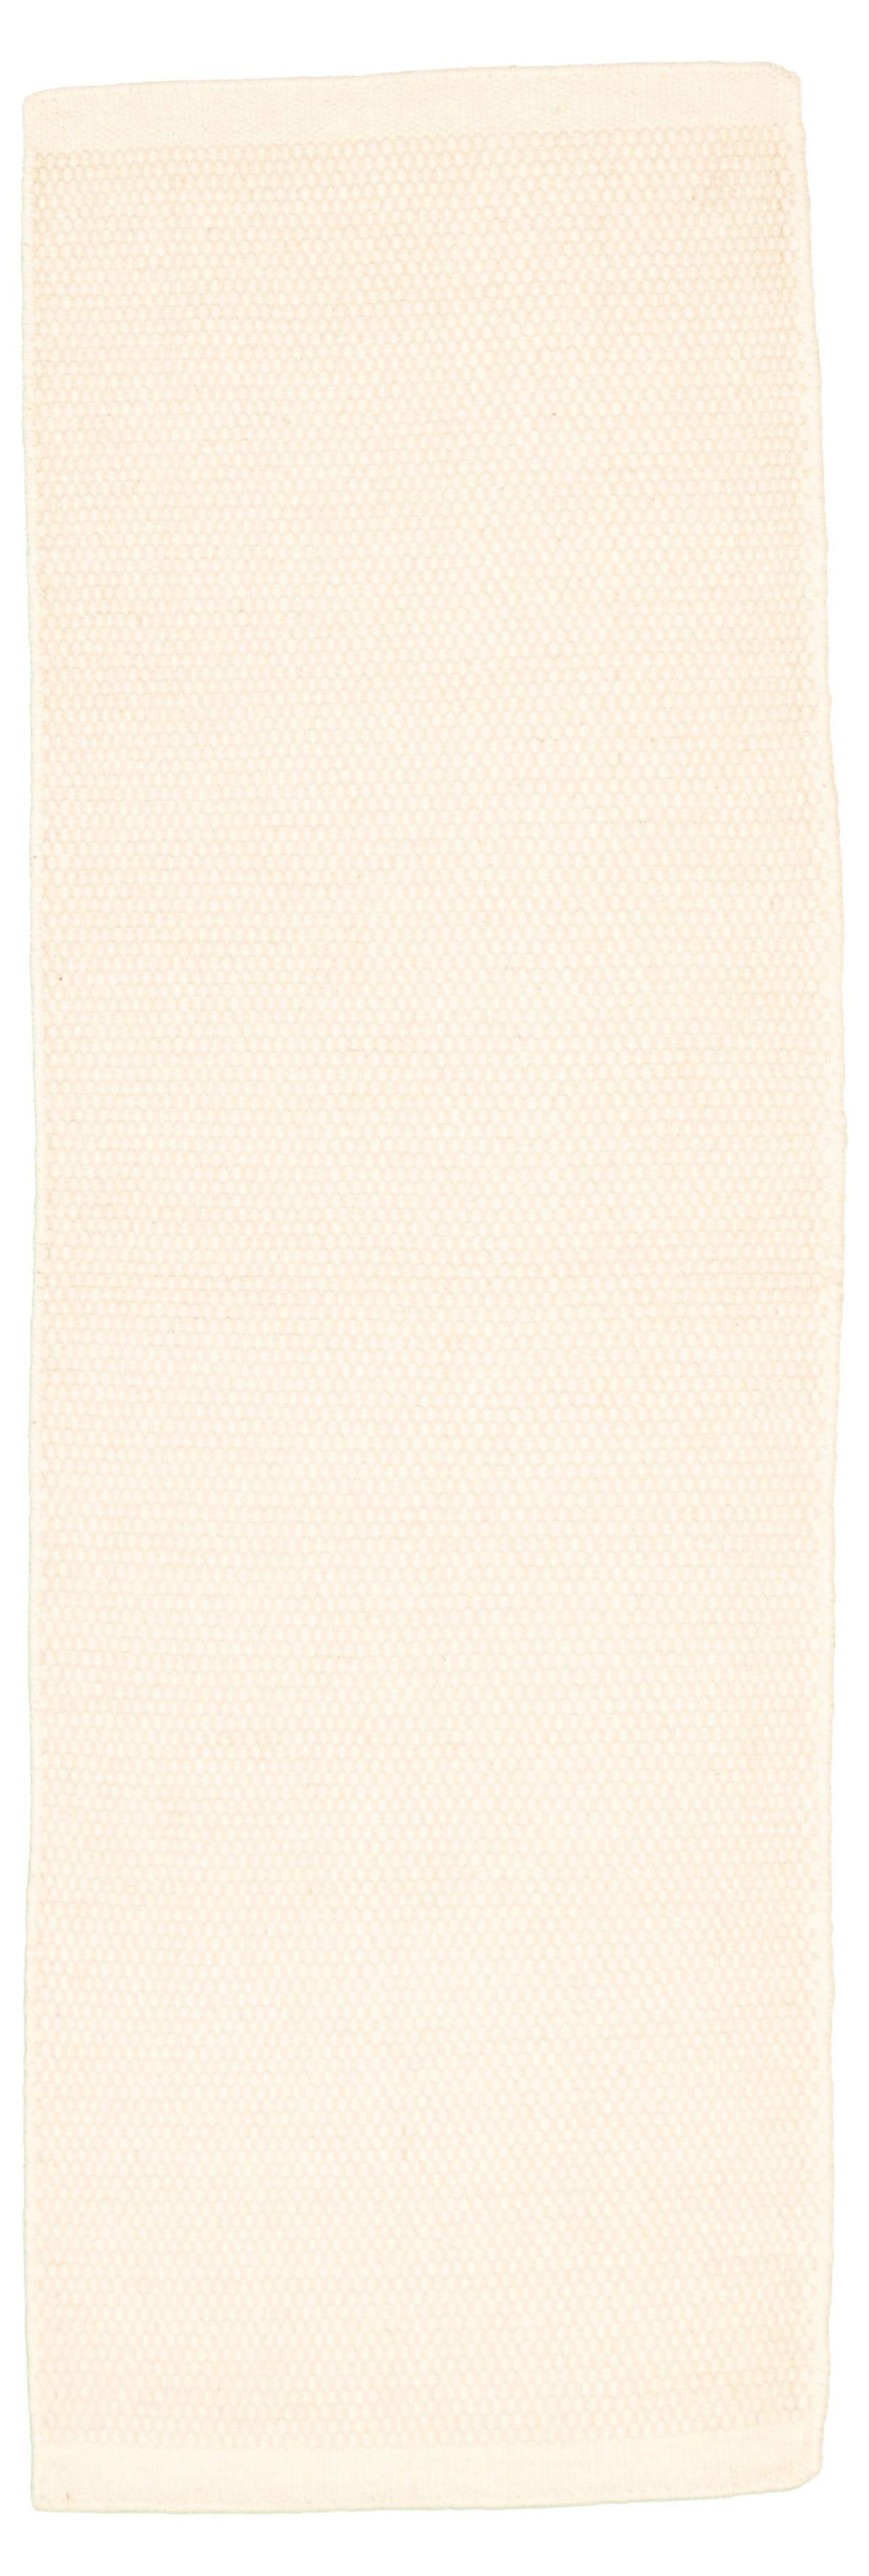 Hand loomed Bungalow CR Cream Wool Dhurrie 2'8" x 6'9" Size: 2'8" x 6'9"  